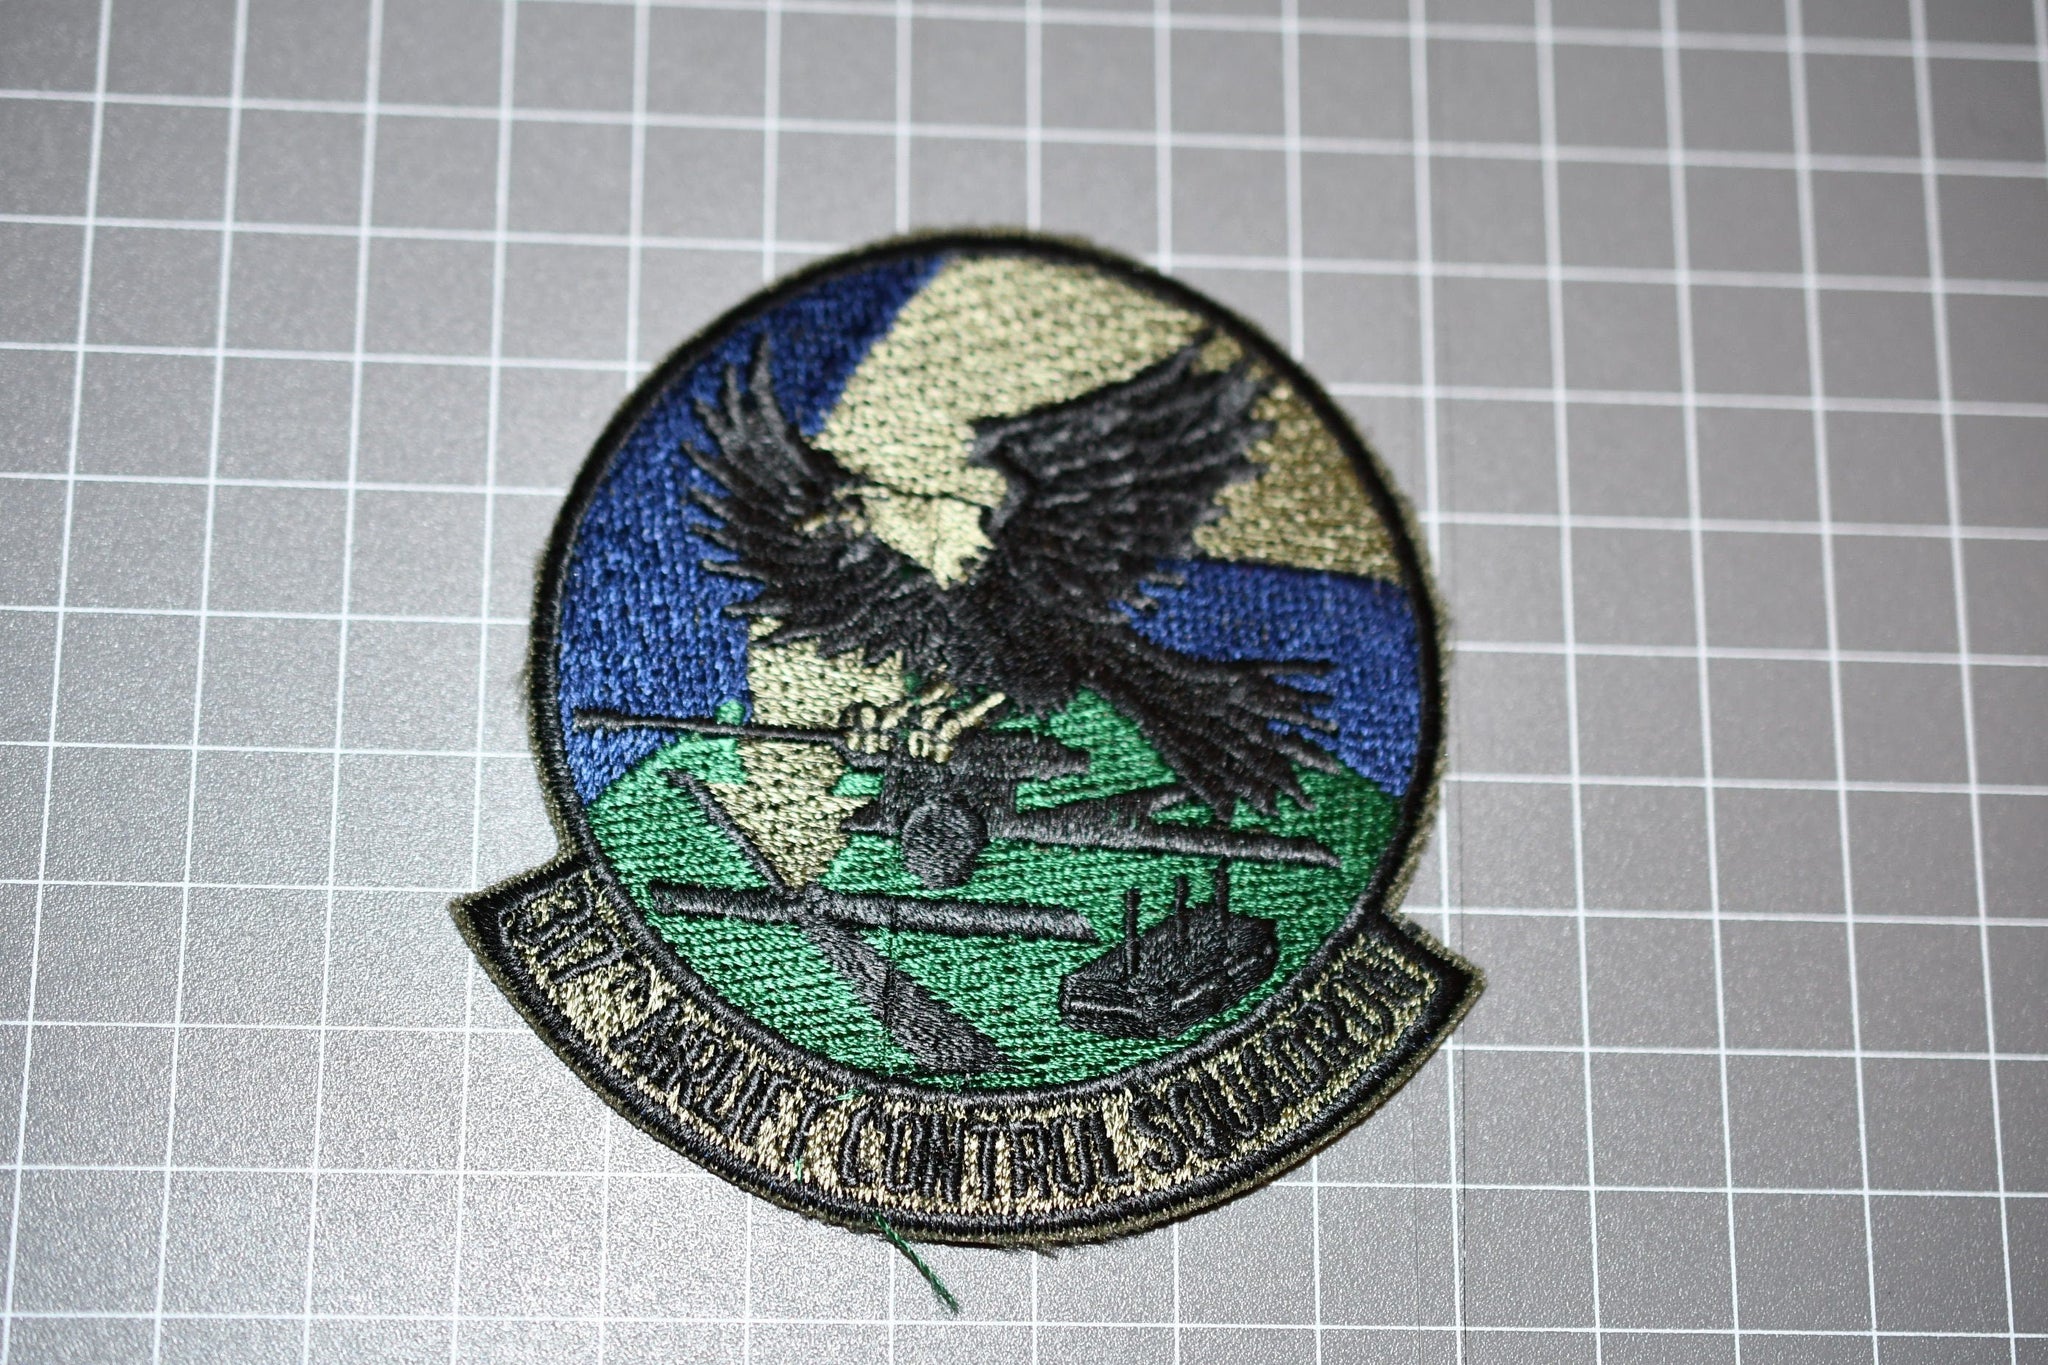 USAF 317th Airlift Control Squadron Patch (B21-148)